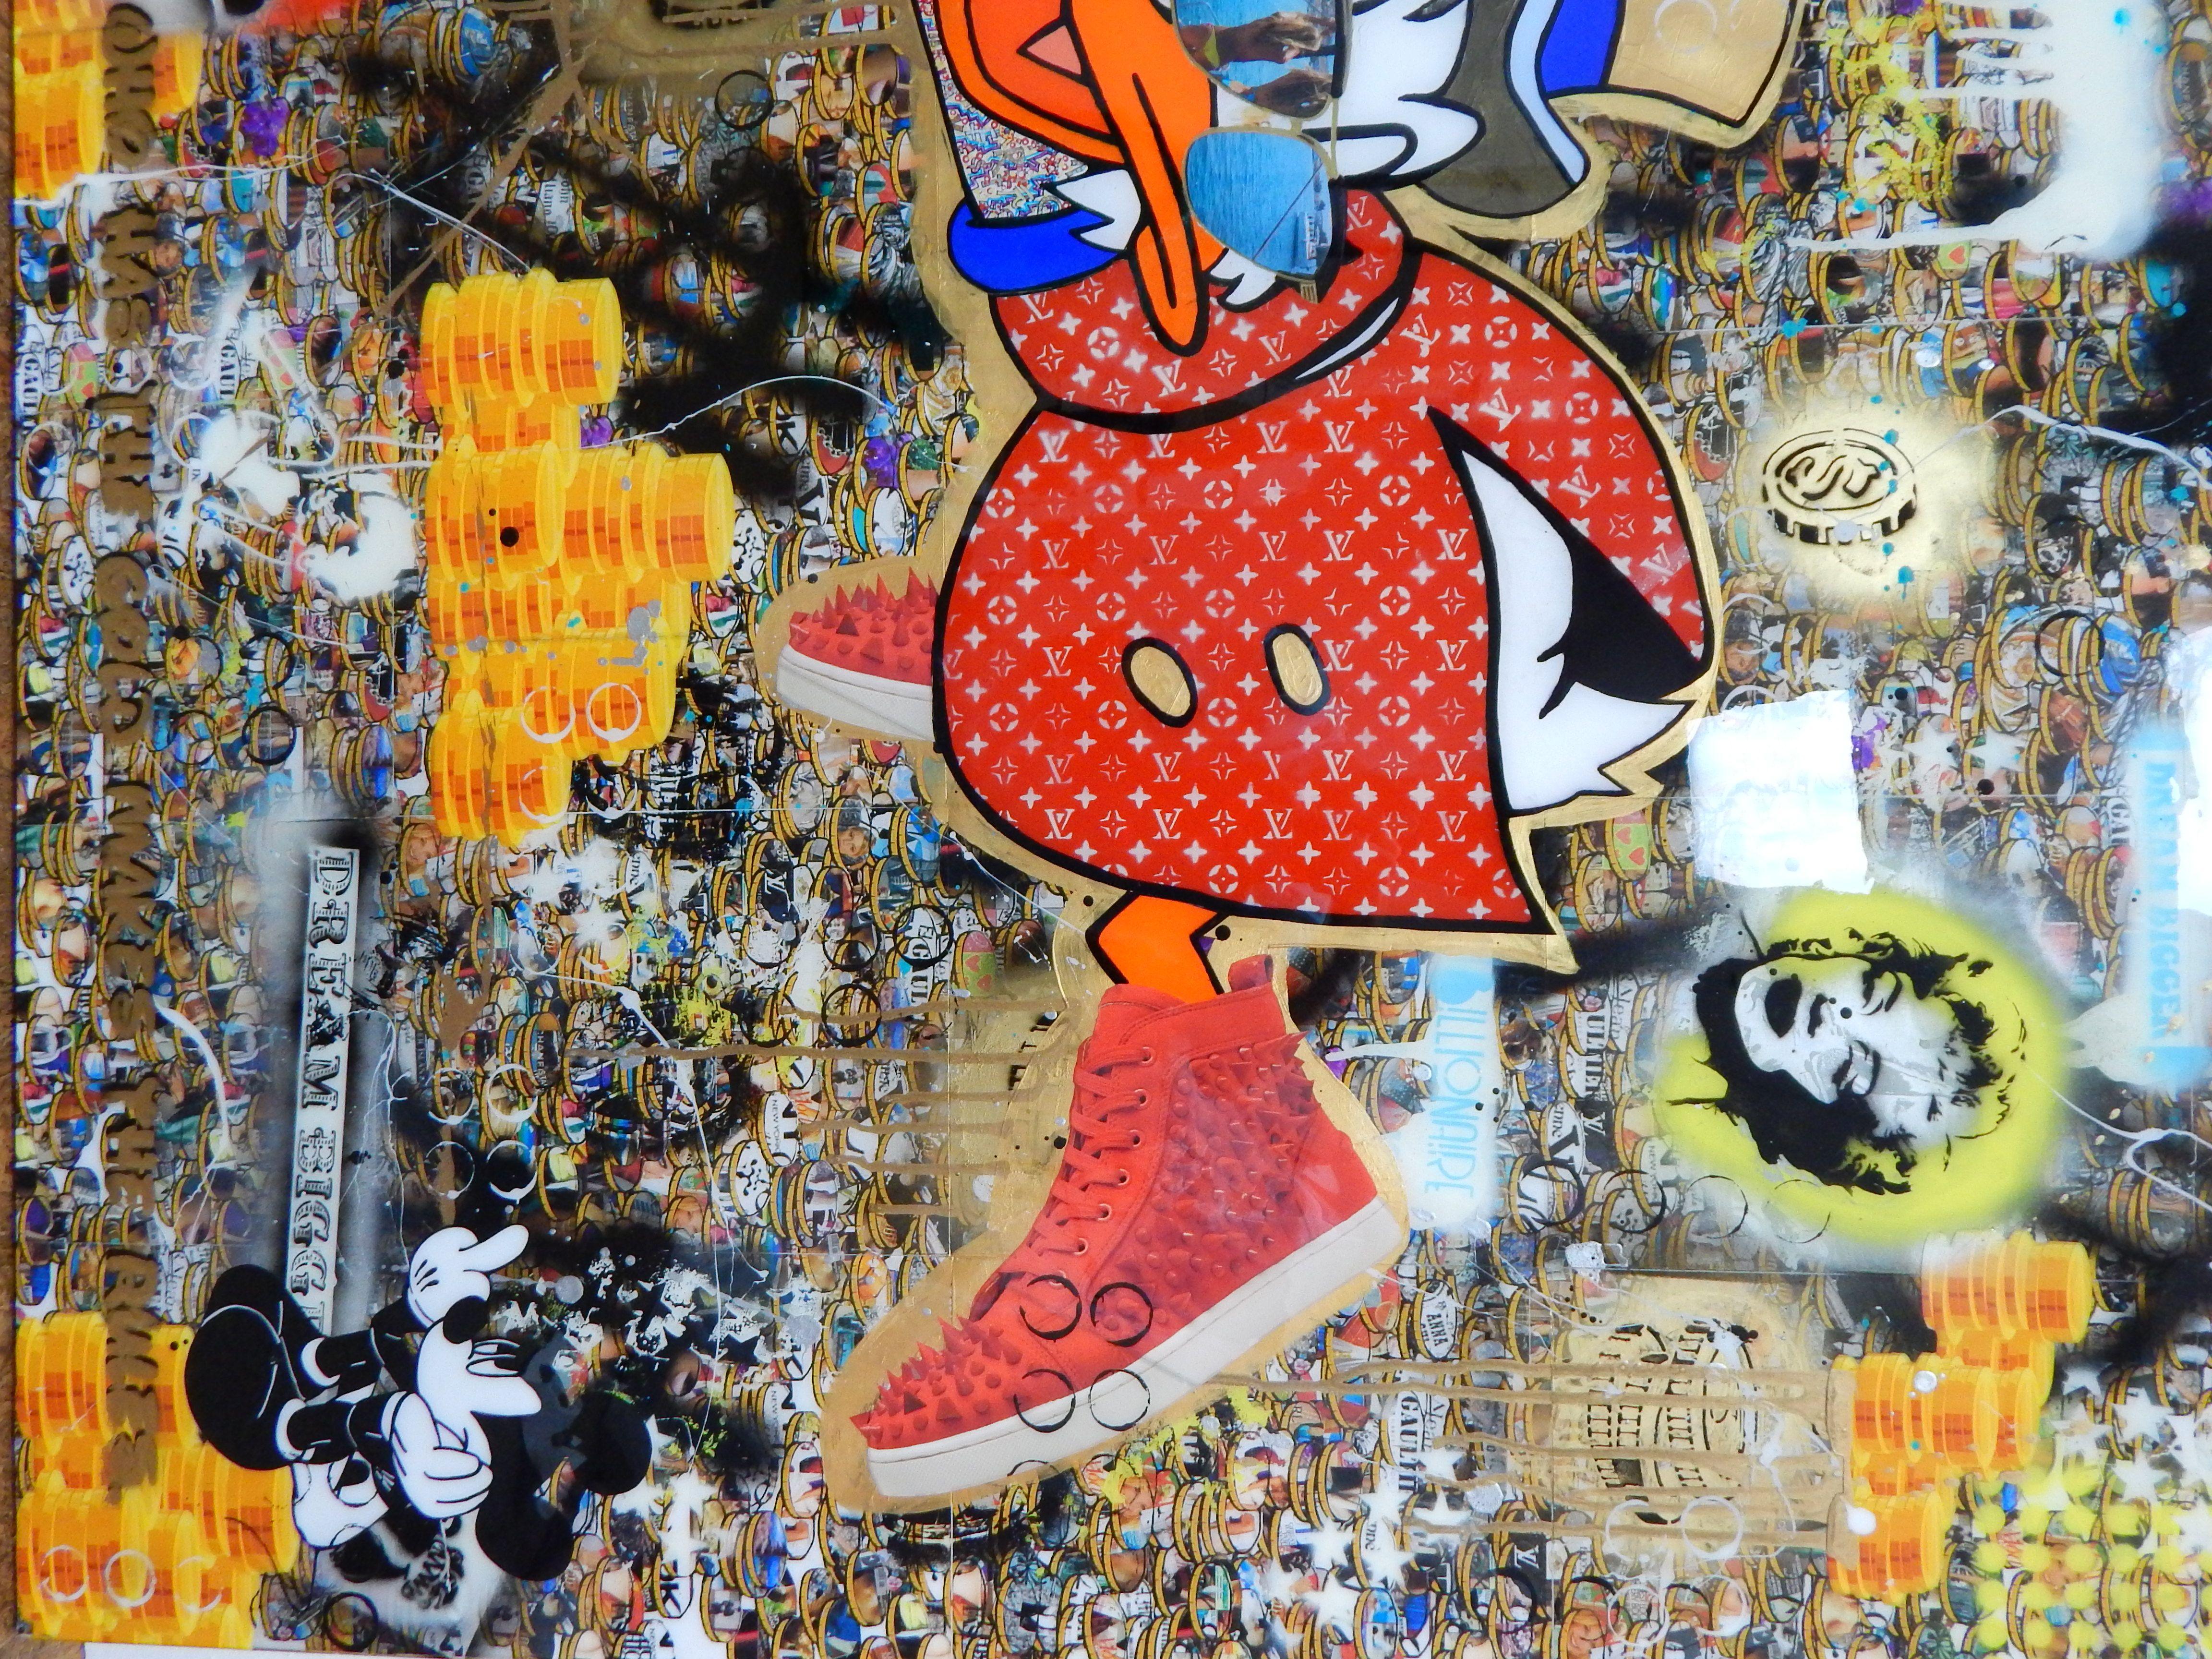 The Golden Rule - He who has the gold, makes the rules. Piece leverages Scrooge McDuck and his wealth, calling light to the haters (Mickey/Goofy). Piece celebrates the power of hard work and financial success.  Collage materials, acrylics, spray